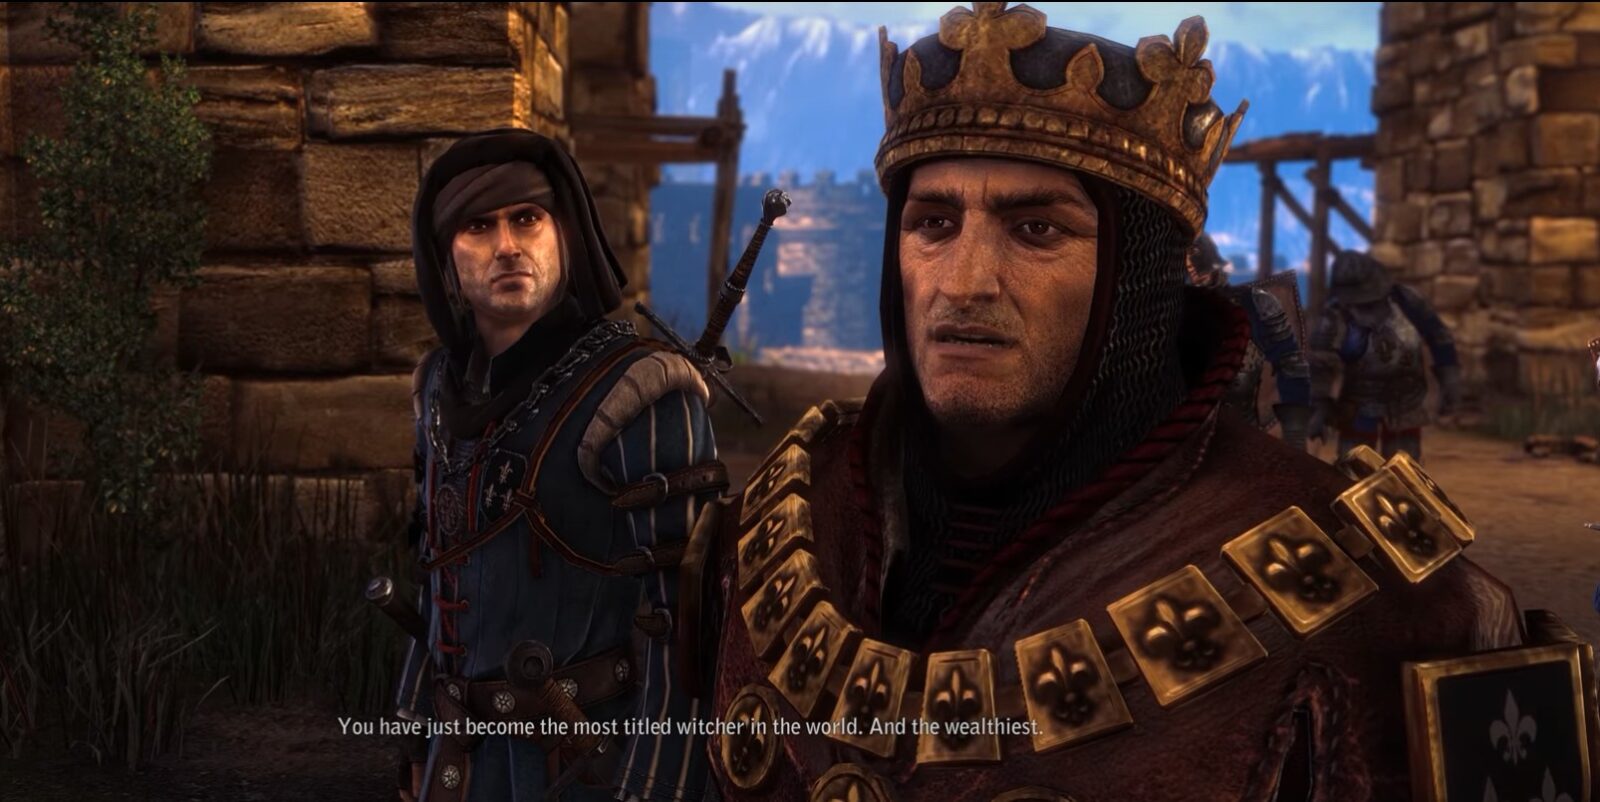 Meet with King Foltest in The Witcher 2